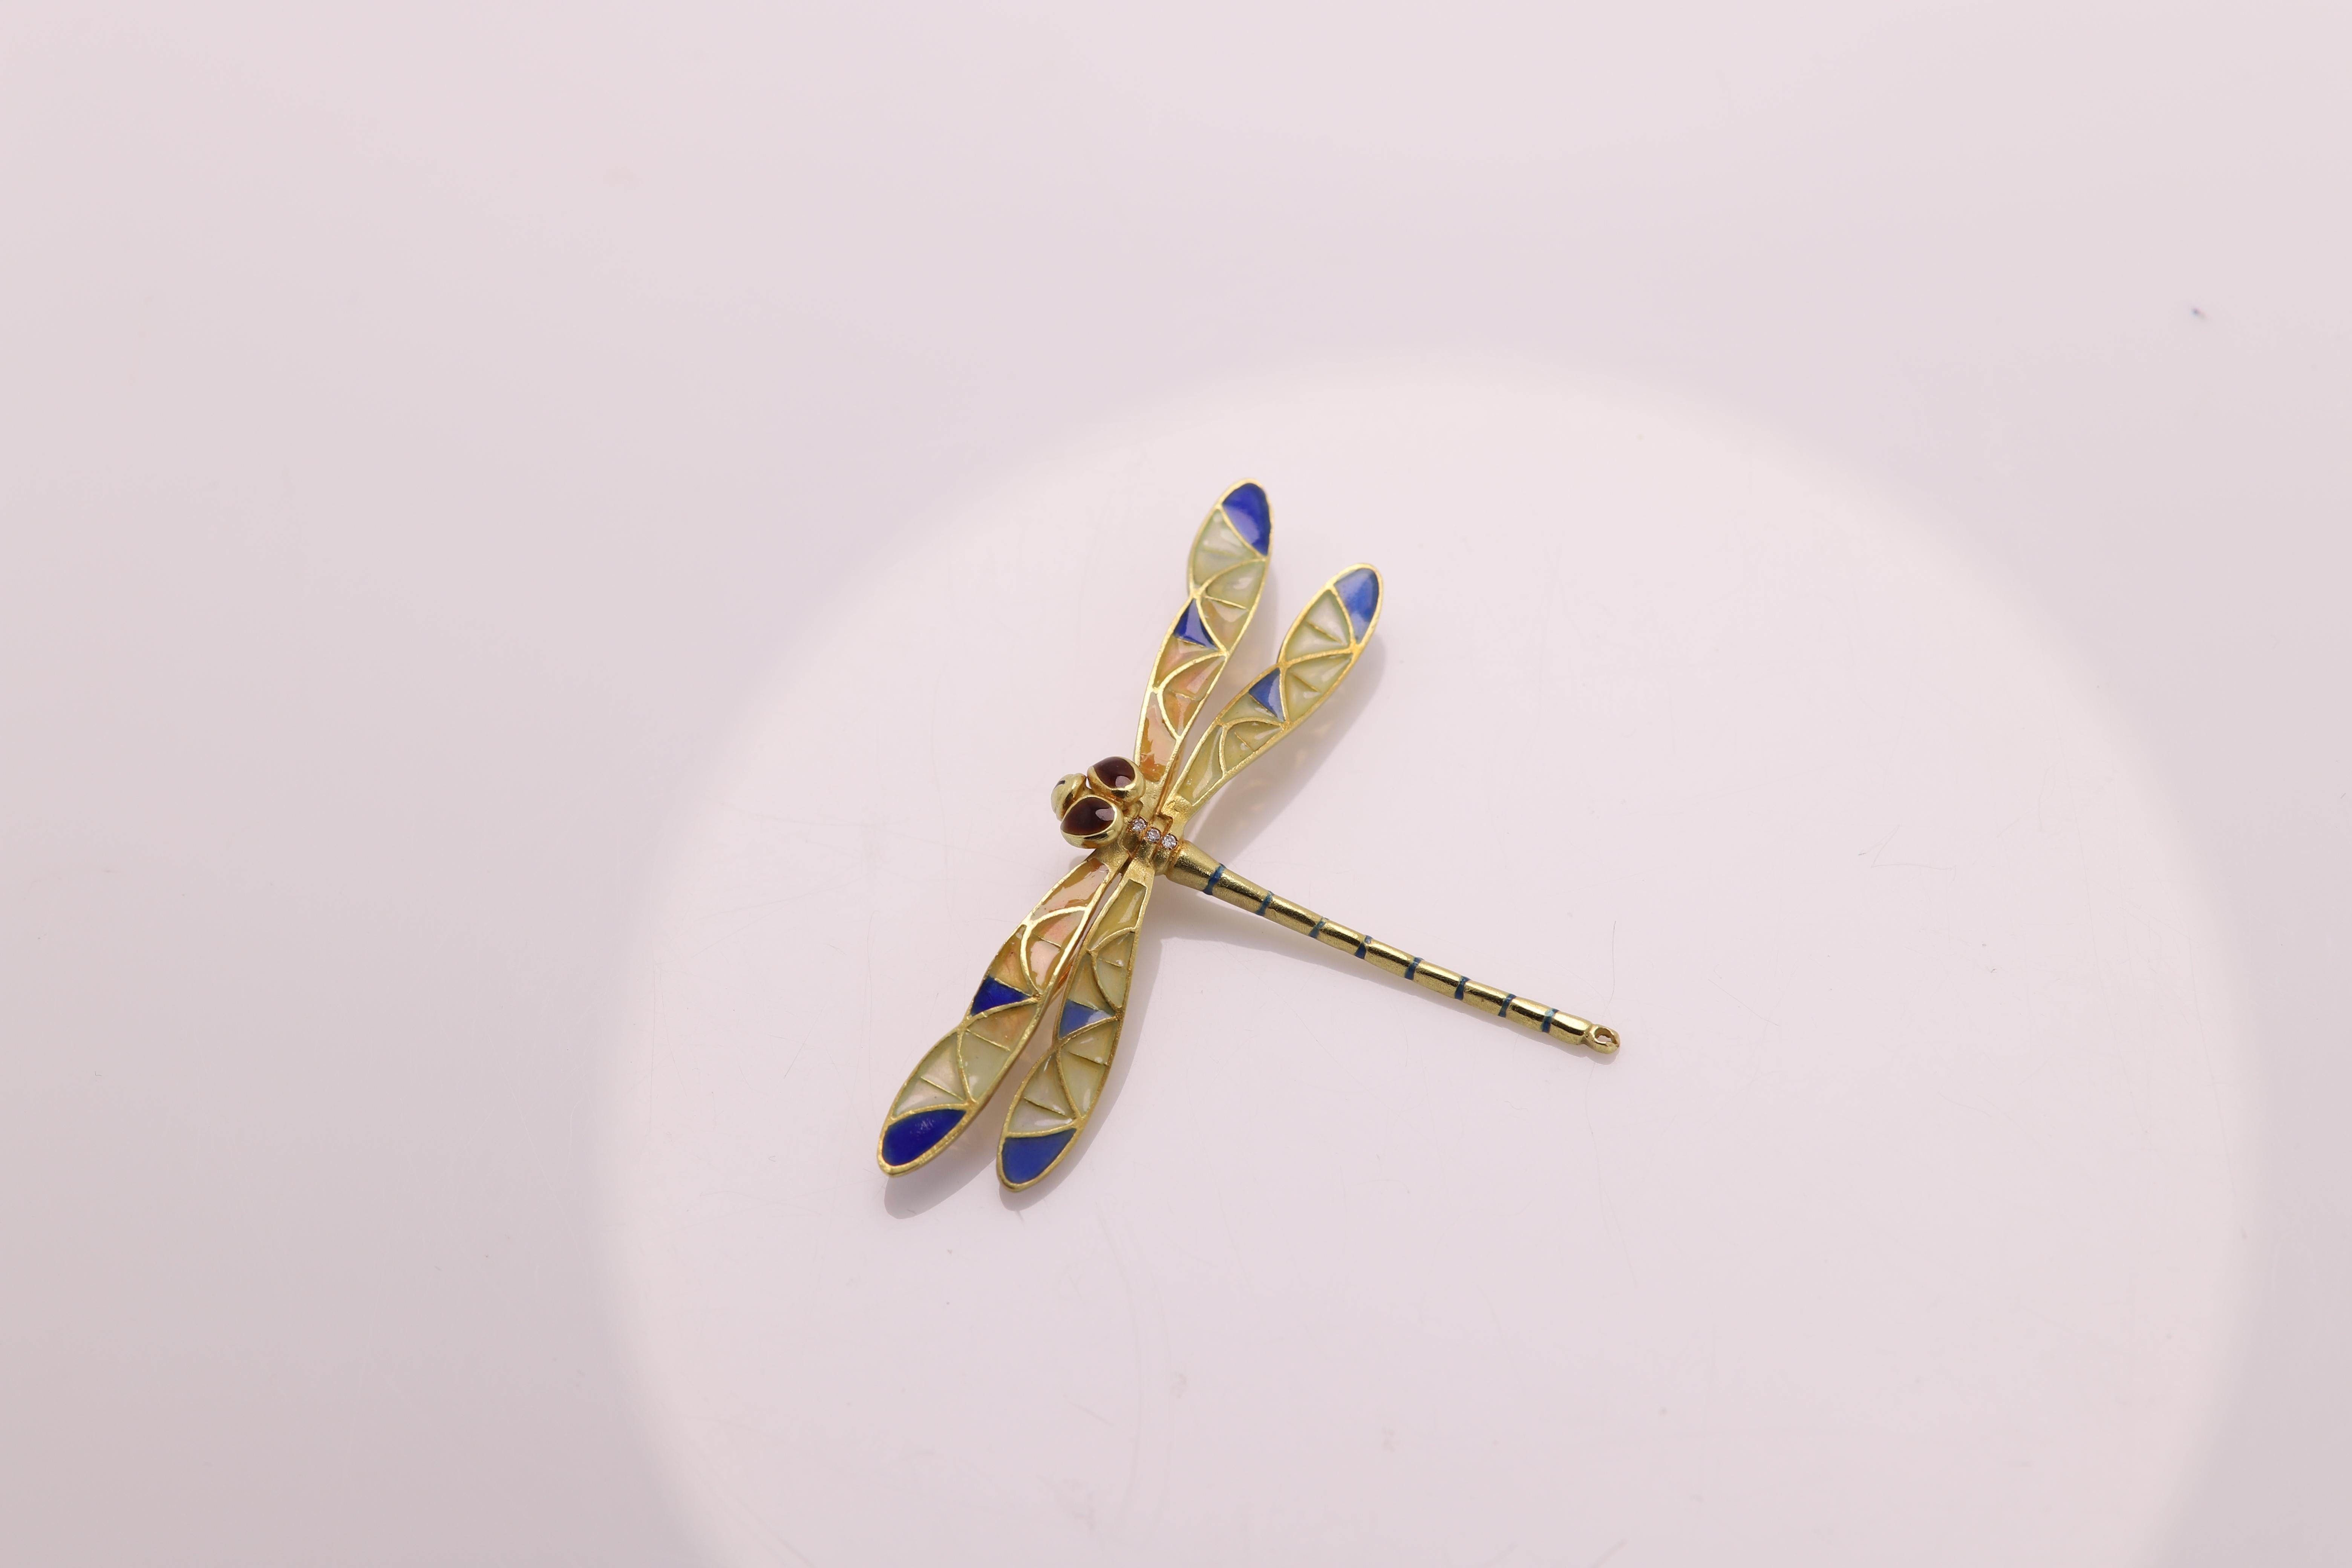 VINTAGE DRAGONFLY BROOCH PIN / NECKLACE
Hand made in Spain with brilliant colors of Enamel
18K Yellow Gold
Total weight 7 grams
Has three small diamonds
Dimension: 2.25' inch wide
Can be used for a brooch or Pendant (chain not included)
was made